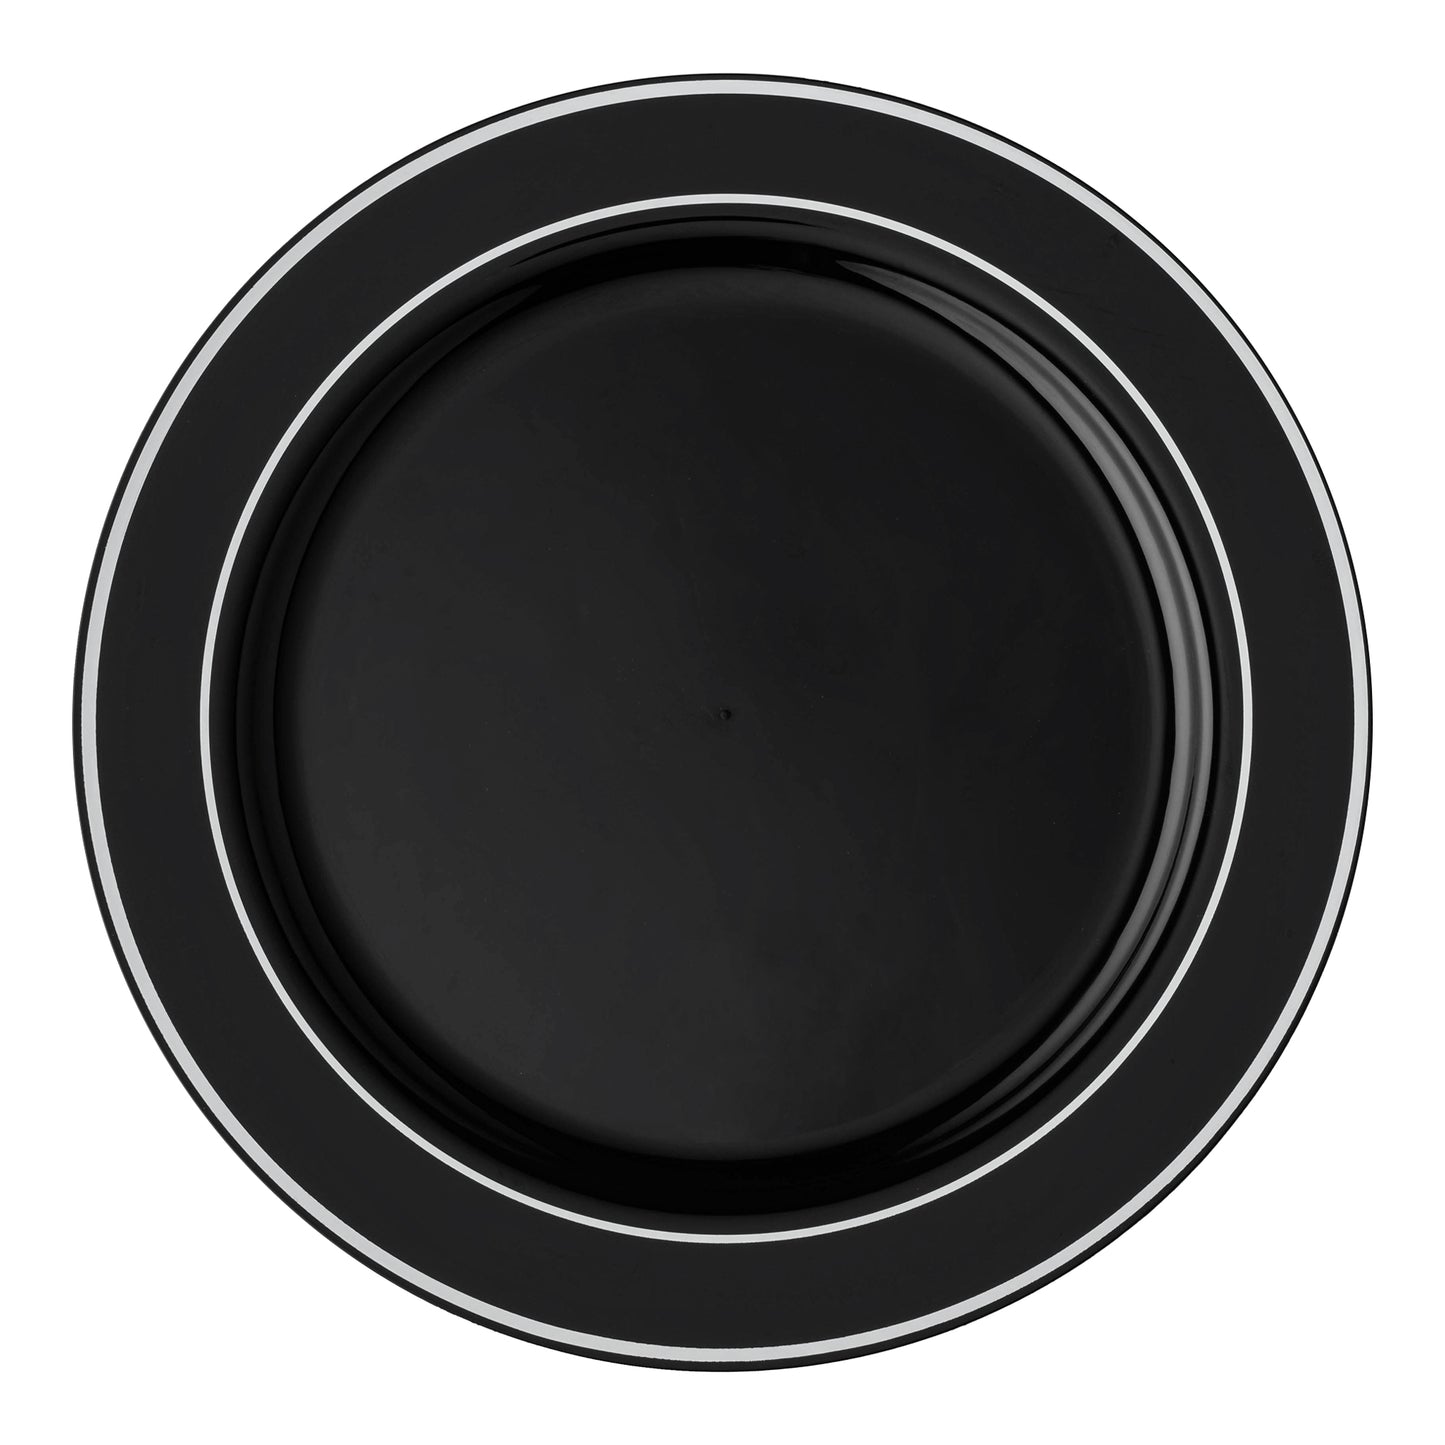 Black with Silver Edge Rim Plastic Appetizer/Salad Plates (7.5") | The Kaya Collection